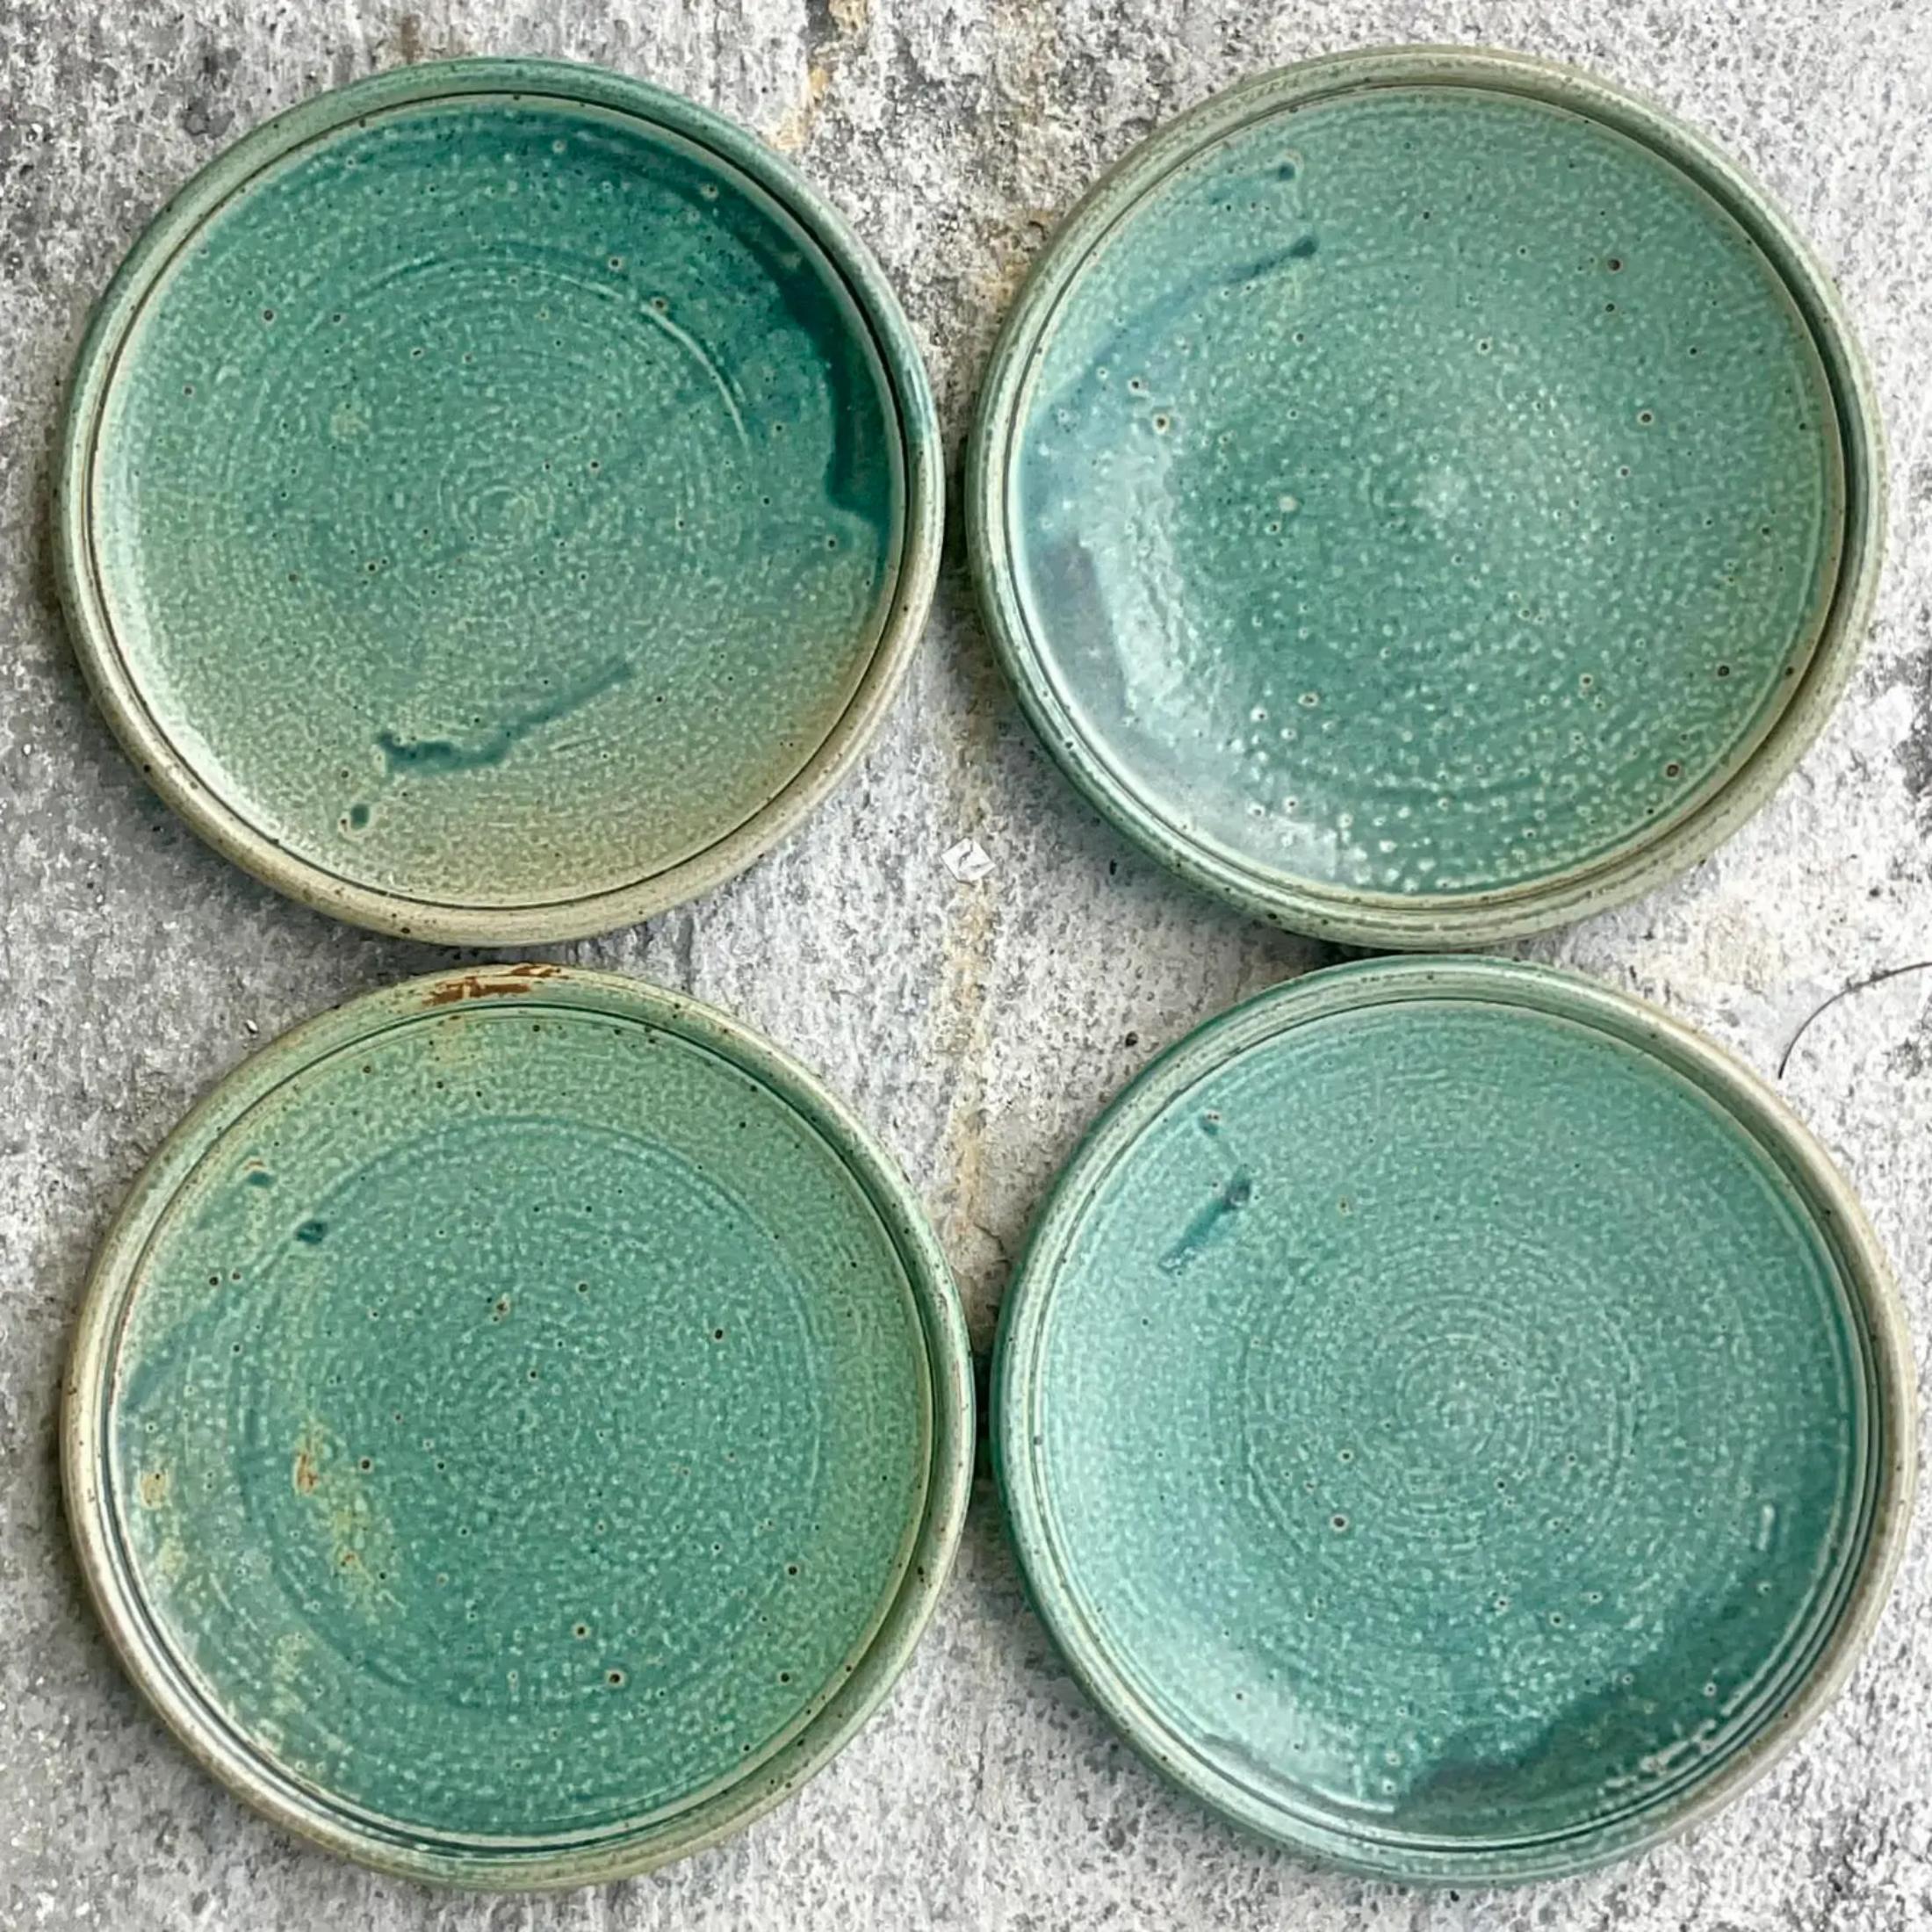 A fabulous set of 8 gorgeous dinner and salad plates. Super chic hand made studio pottery in thr most beautiful shade of green. Four dinner plates and four salad plates. Acquired from a Palm Beach estate.